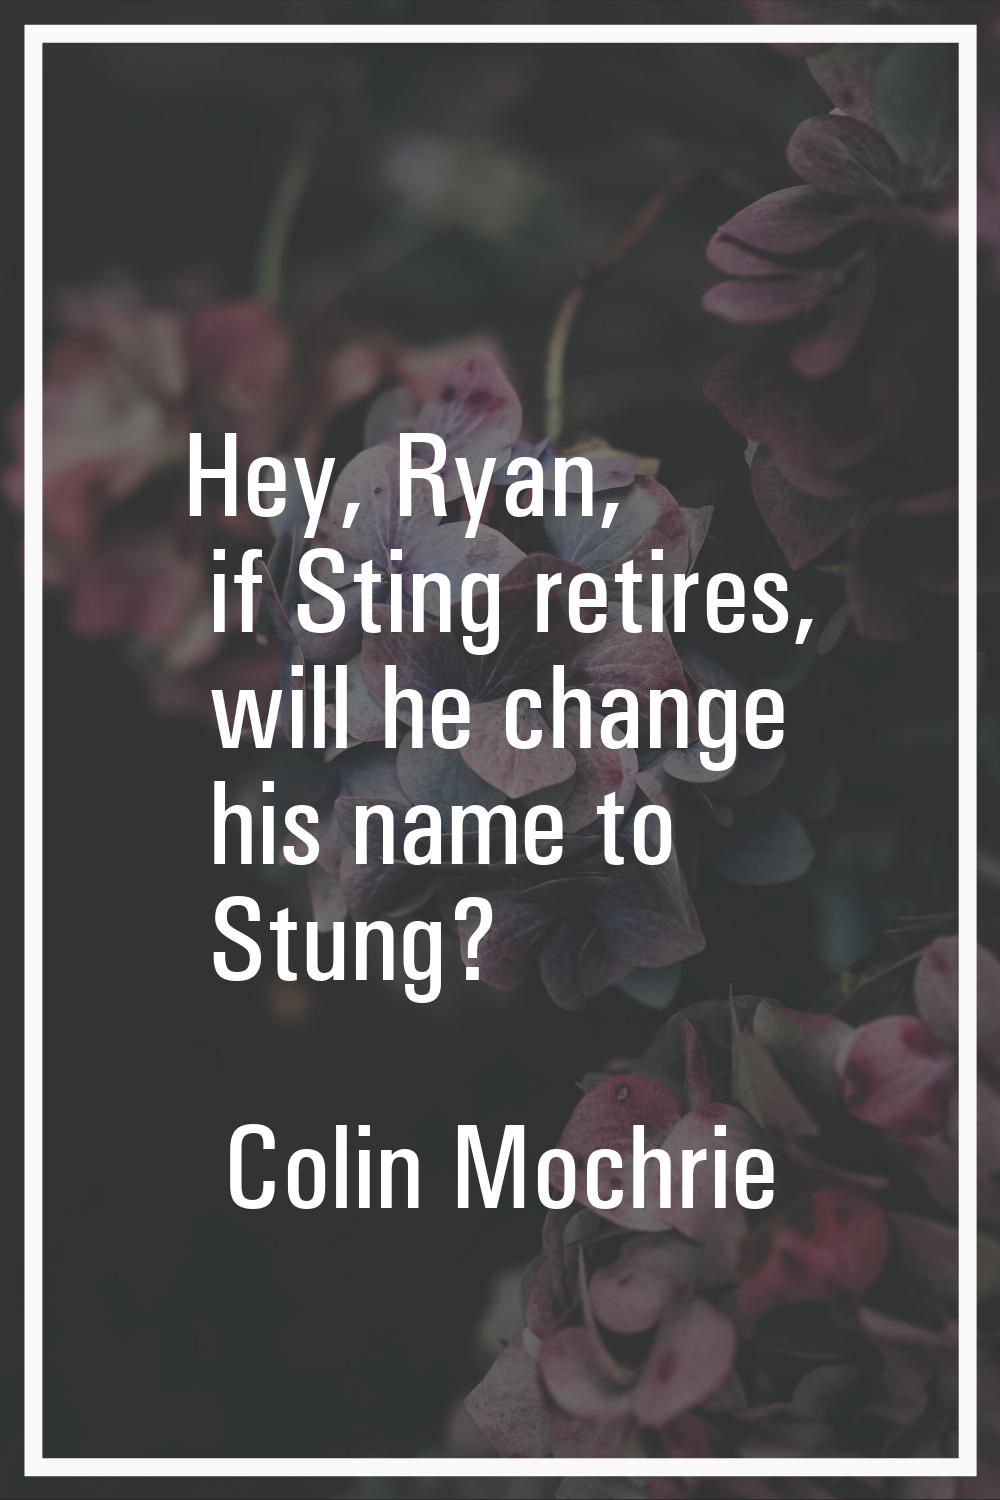 Hey, Ryan, if Sting retires, will he change his name to Stung?